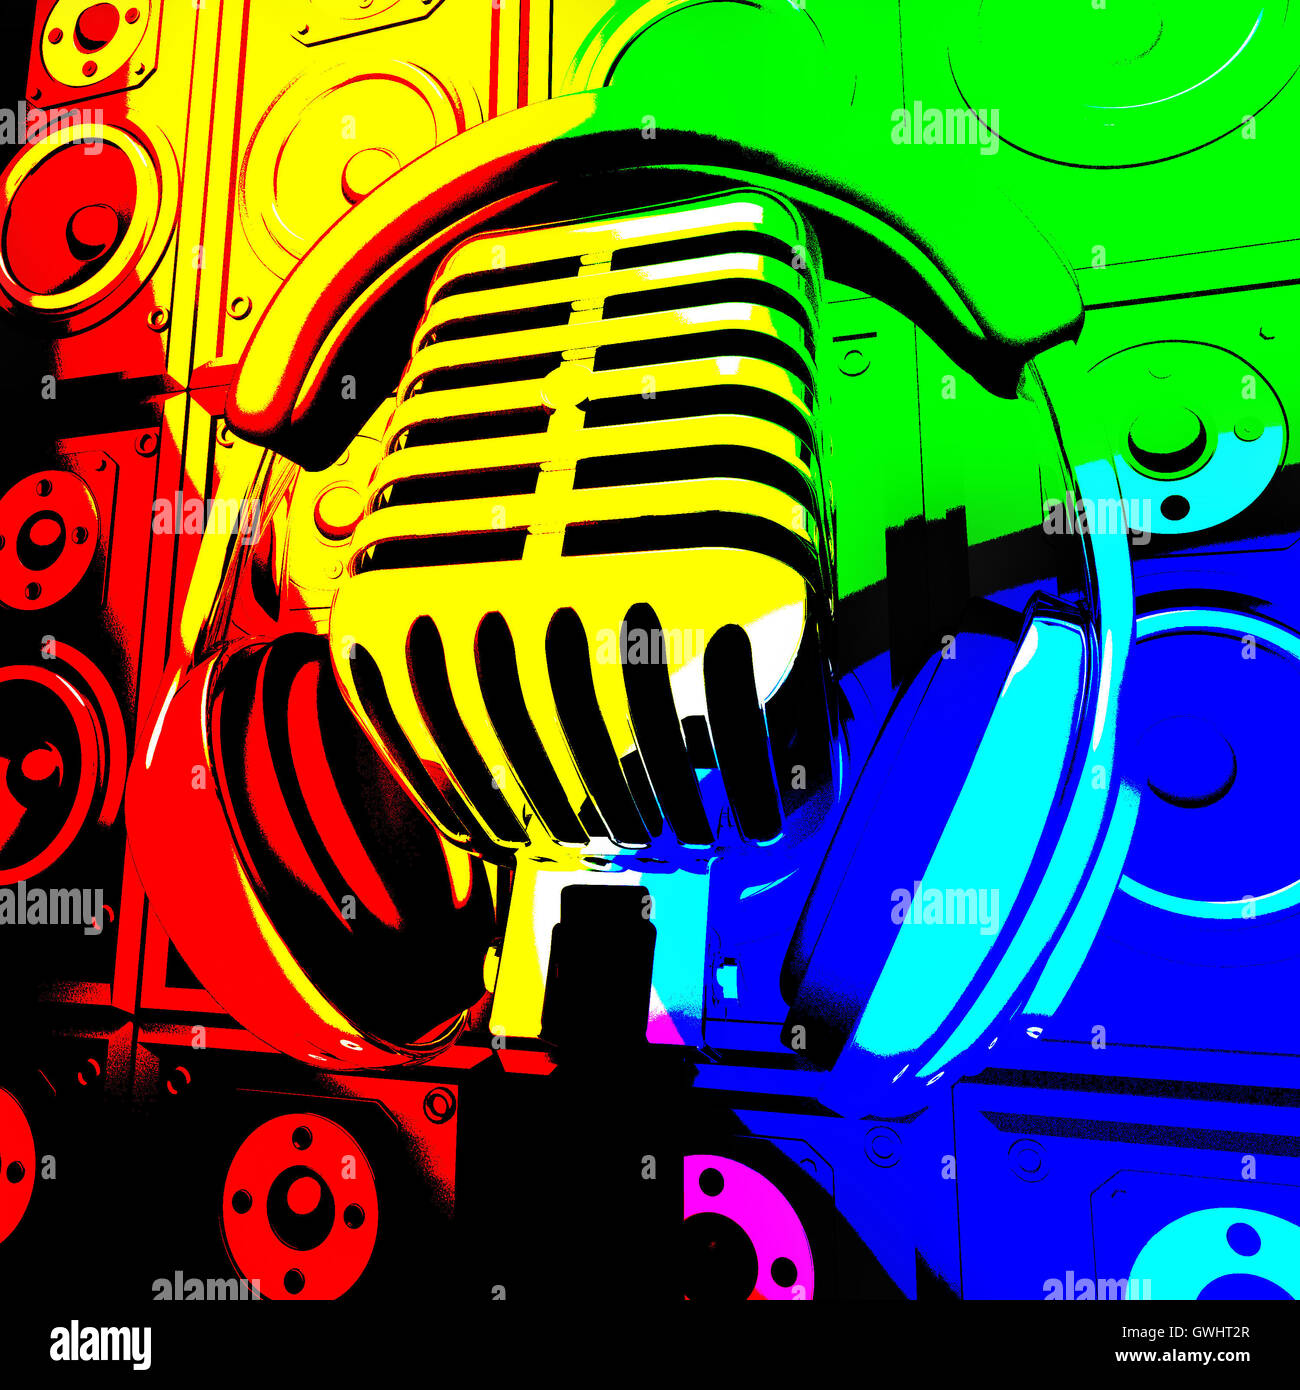 Headphones Mic And Speakers Shows Music Recording Or Entertainme Stock Photo